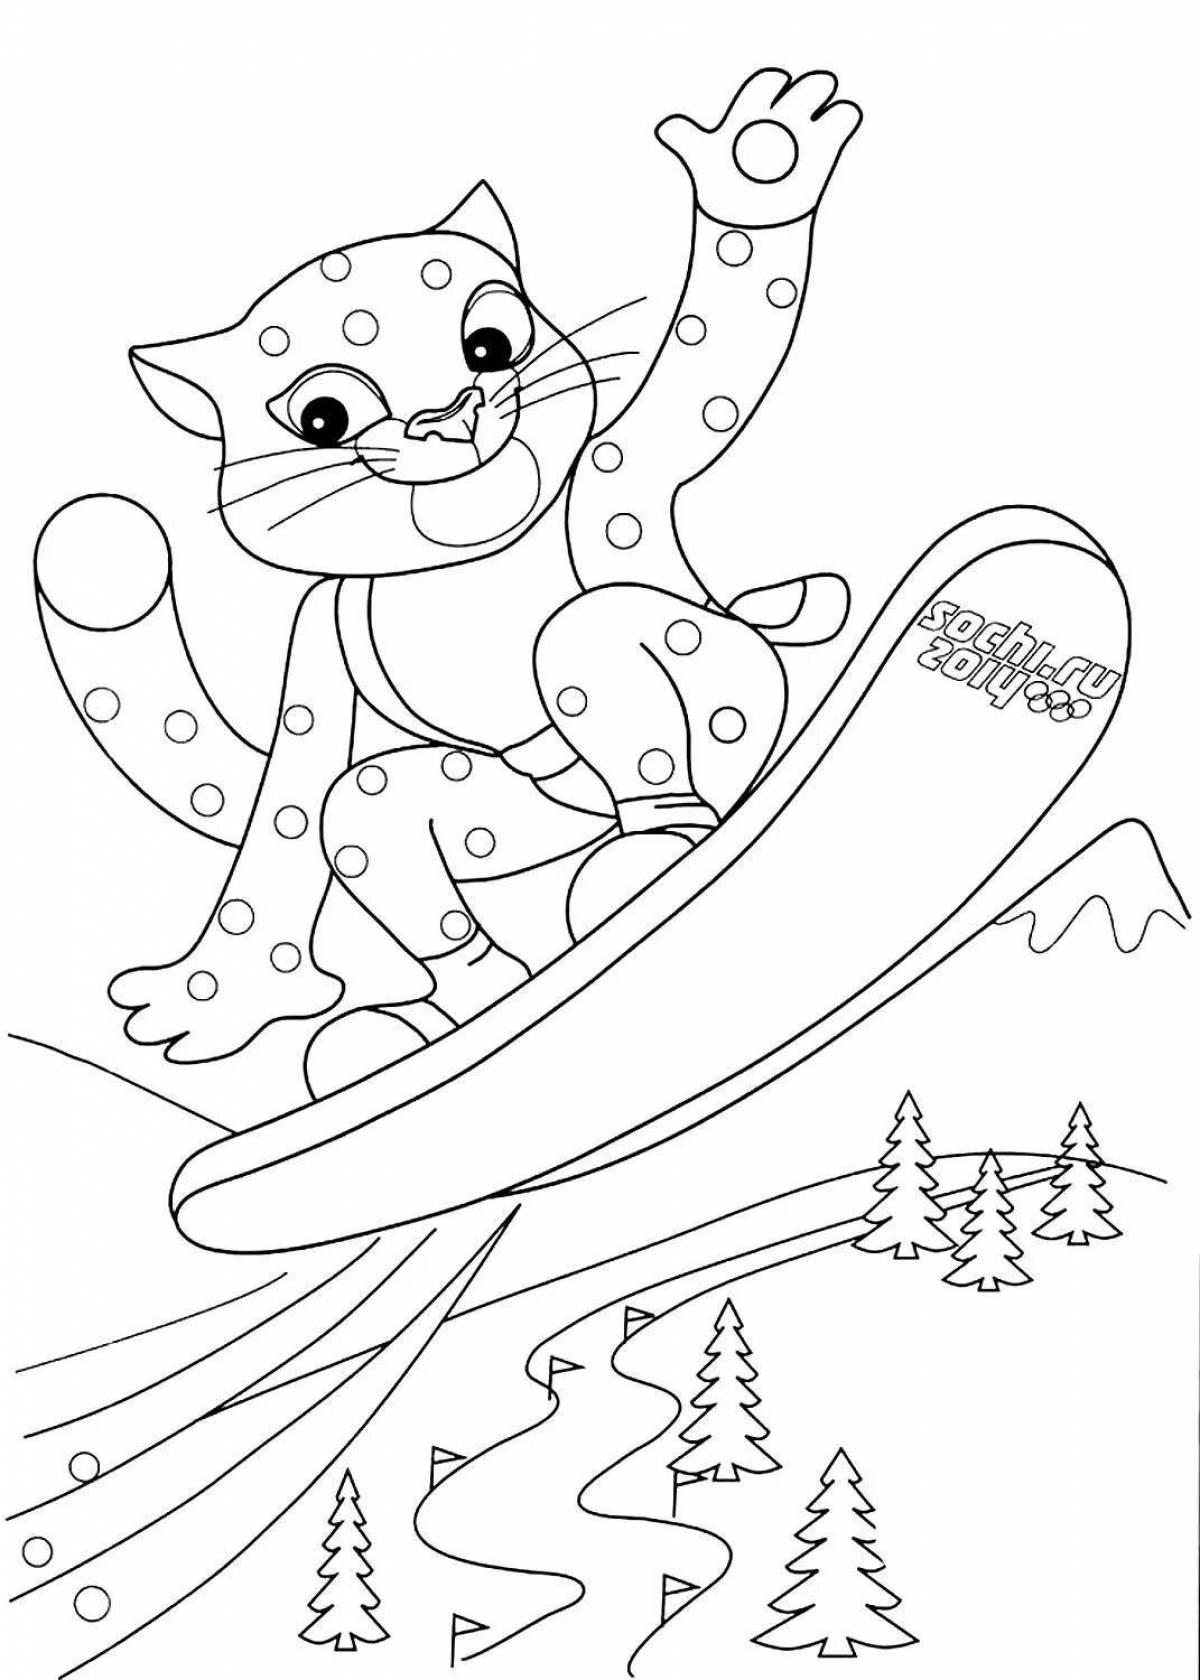 Coloring page joyful winter olympic games